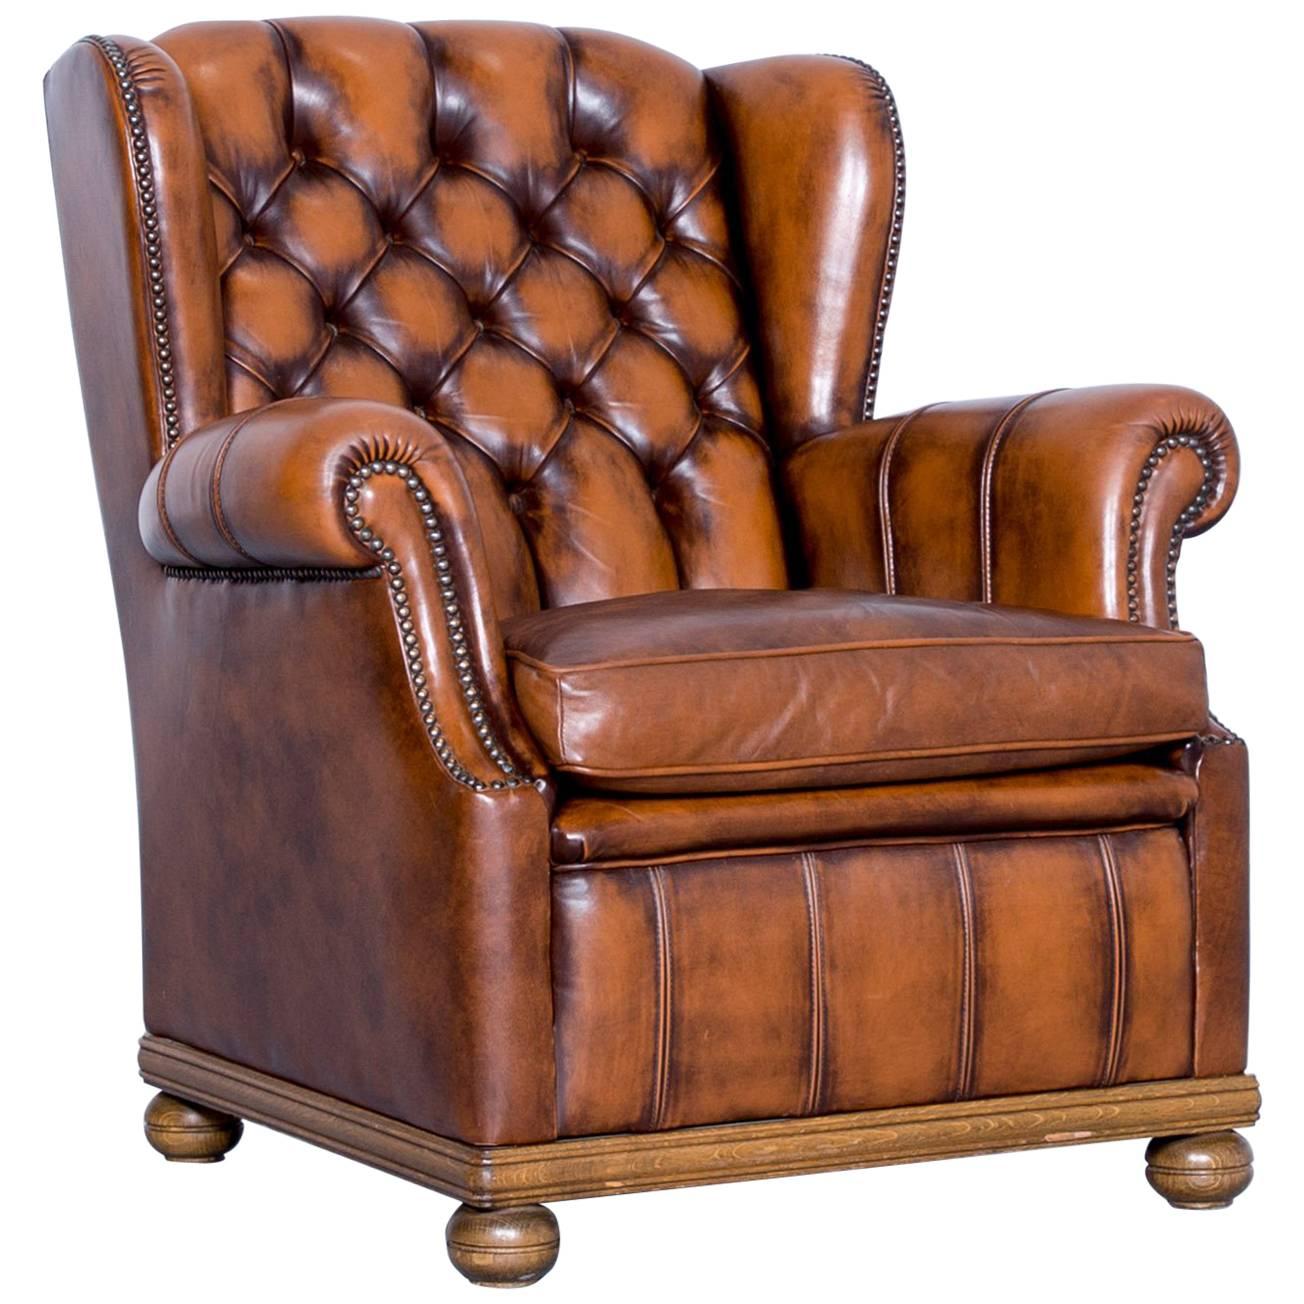 Chesterfield Armchair Leather Brown One Seat Couch Retro Vintage Rivets